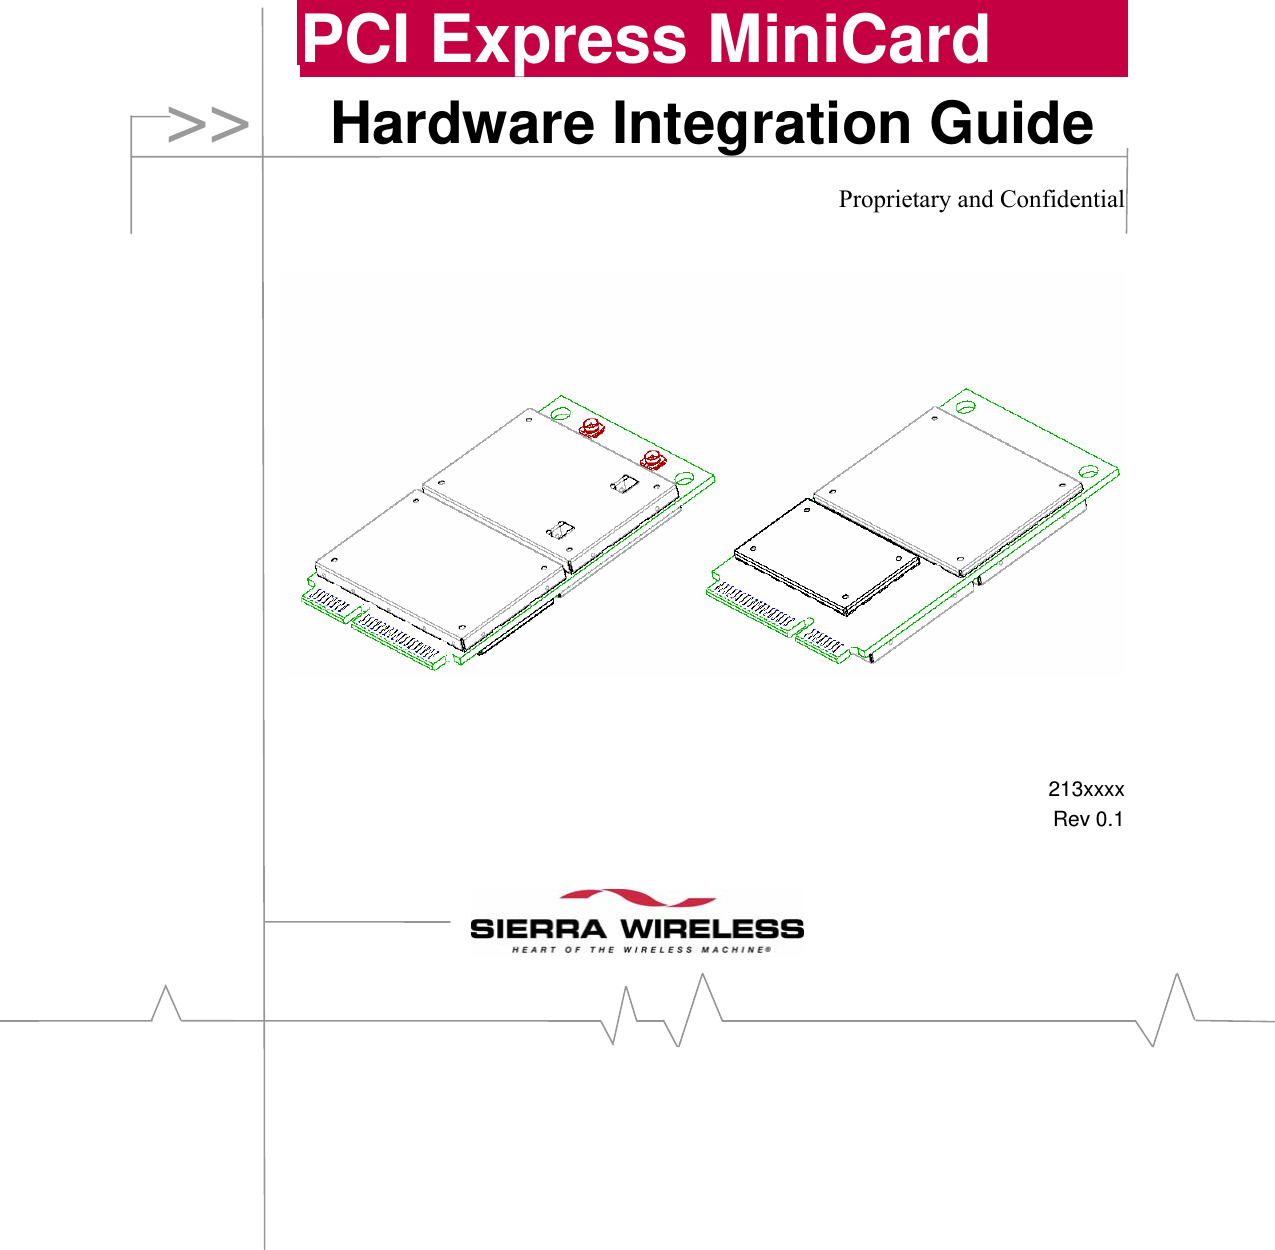     PCI Express MiniCard Hardware Integration Guide  Proprietary and Confidential           213xxxx Rev 0.1    &gt;&gt; 